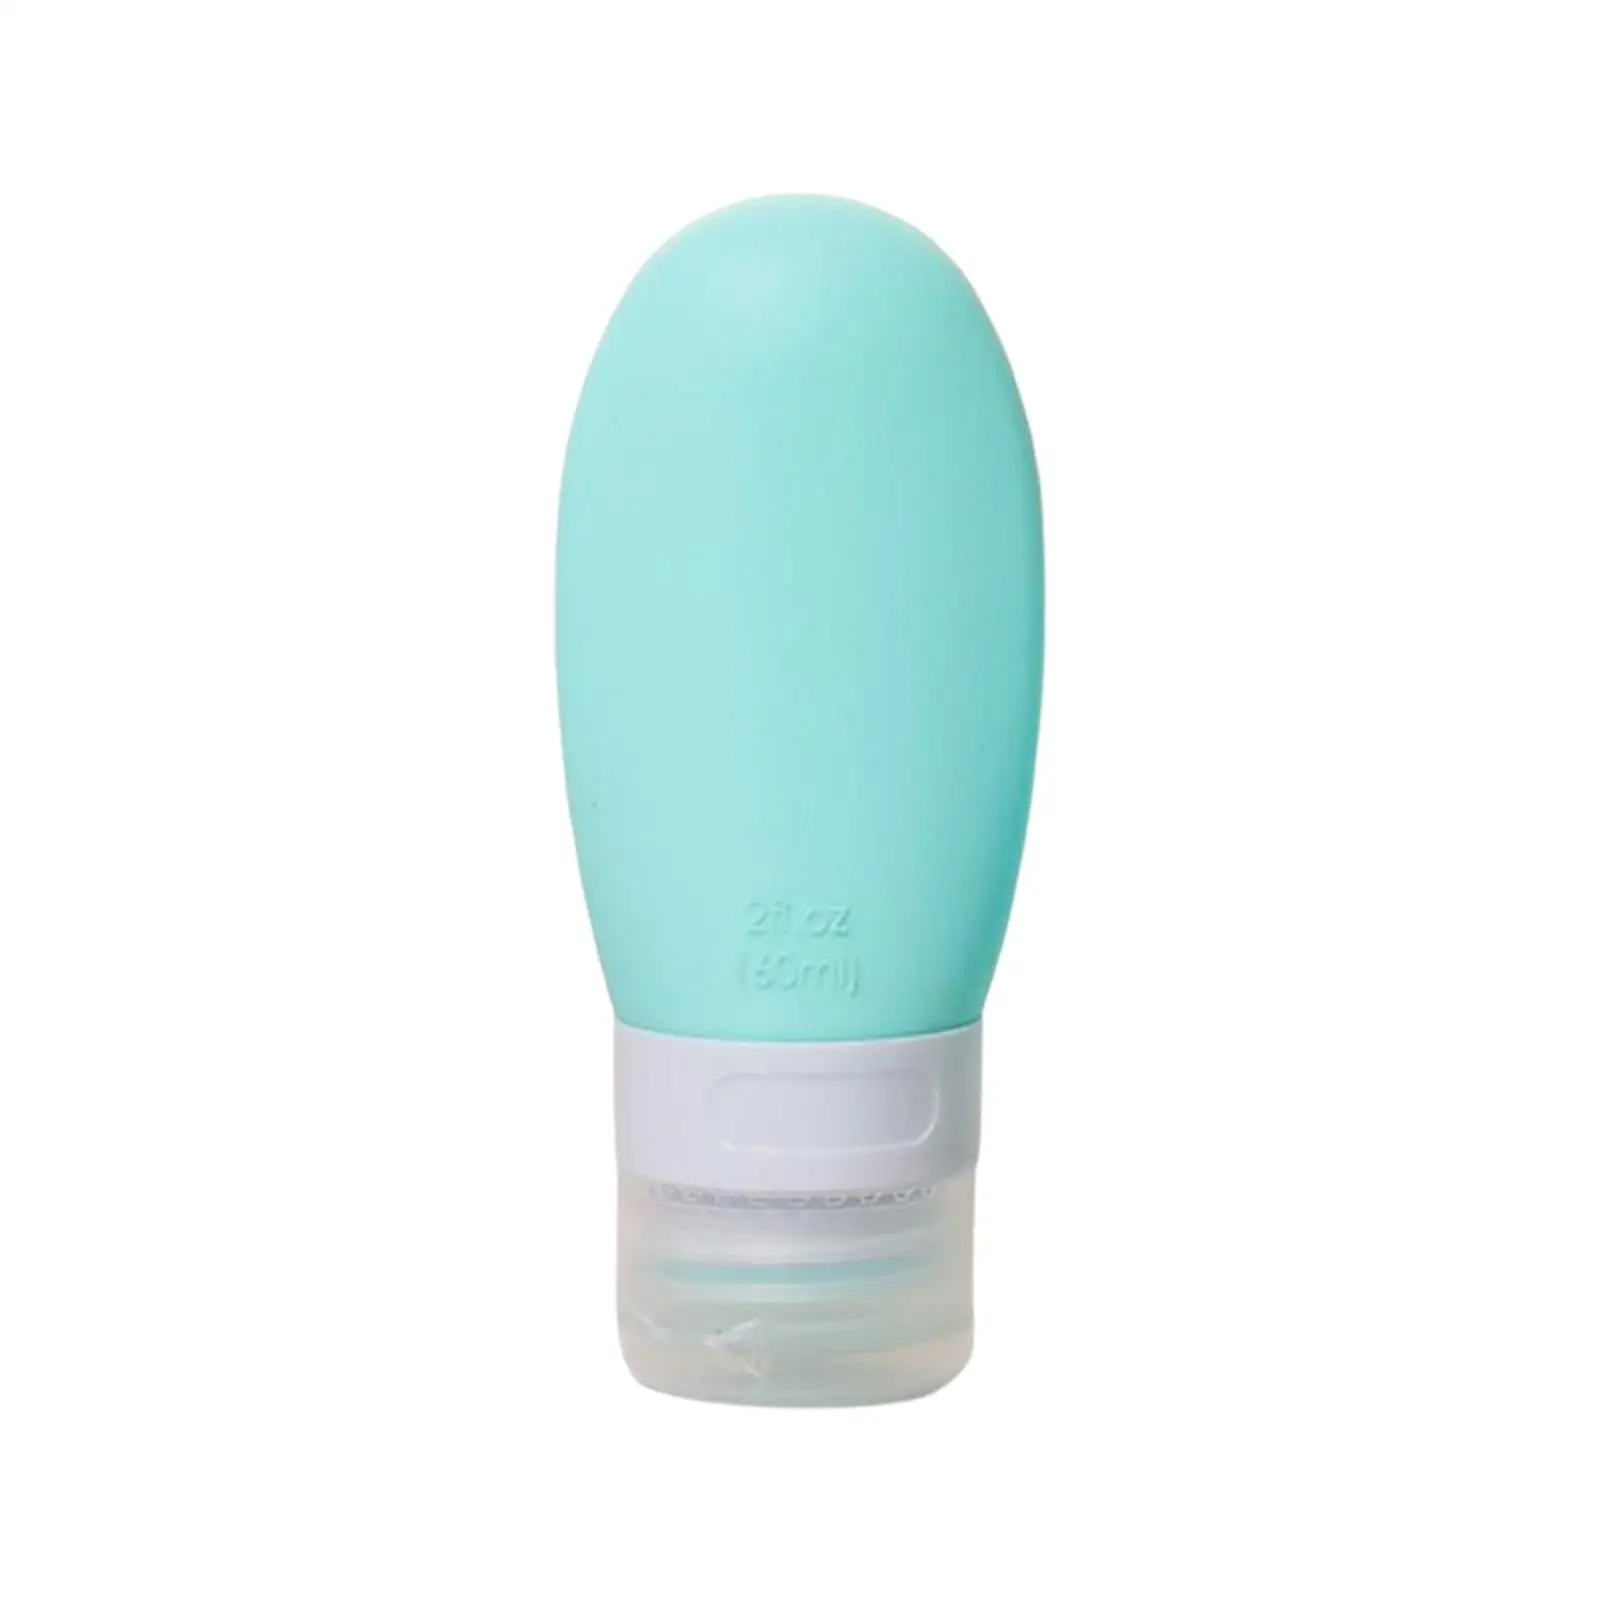 Silicone Travel Bottle Empty Refillable Traveling Size Liquid Container for Toiletries Conditioner Lotion Shampoo Body Wash